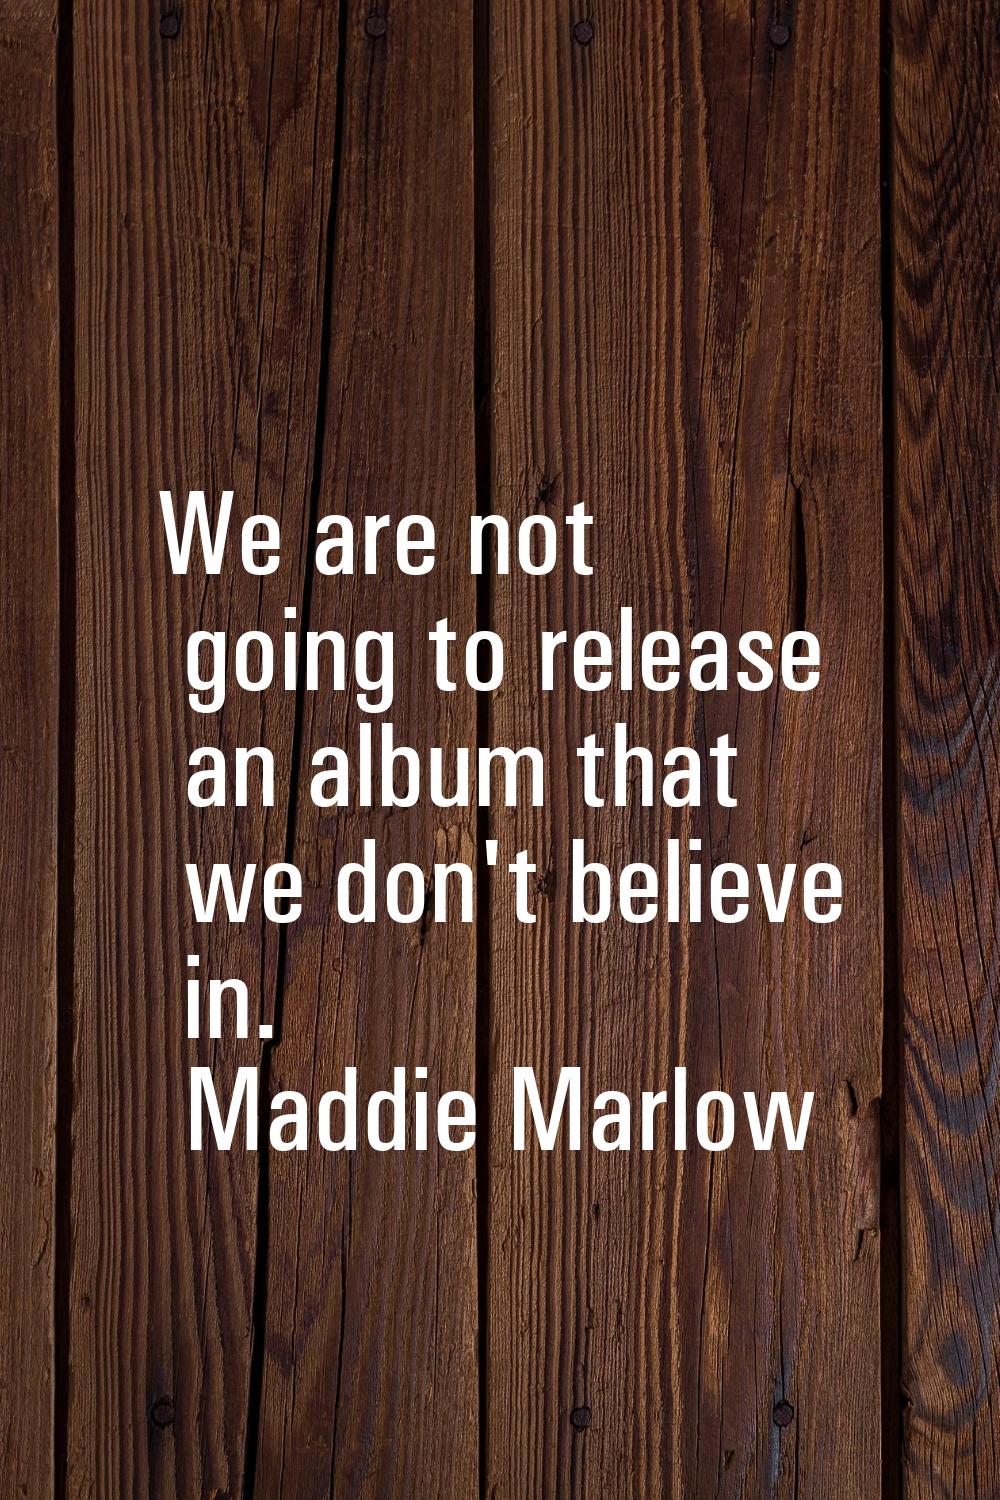 We are not going to release an album that we don't believe in.